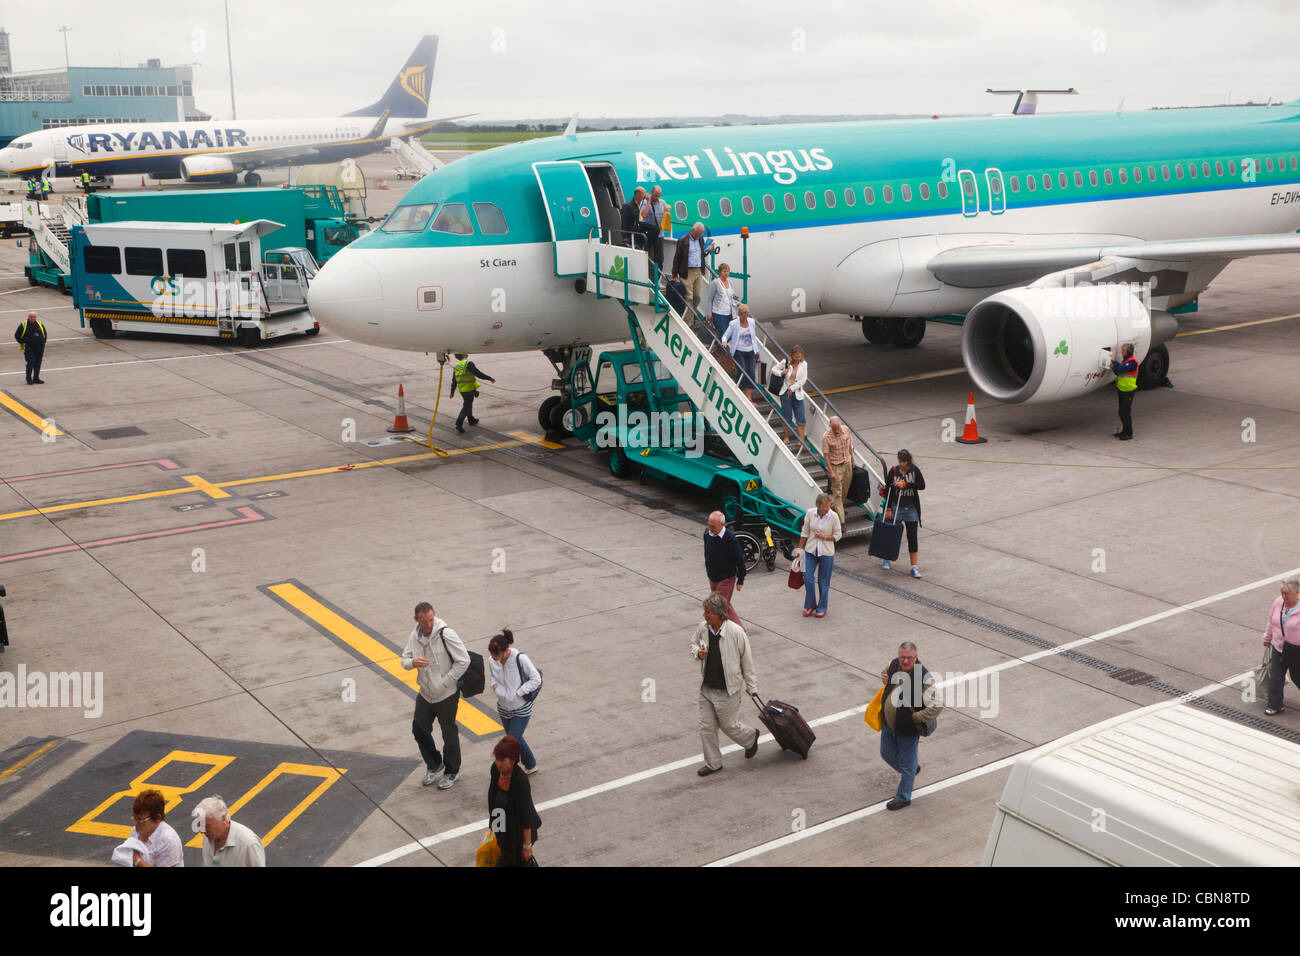 Passengers disembarking from Aer Lingus plane on apron of Cork airport. County Cork, Republic of Ireland. Stock Photo